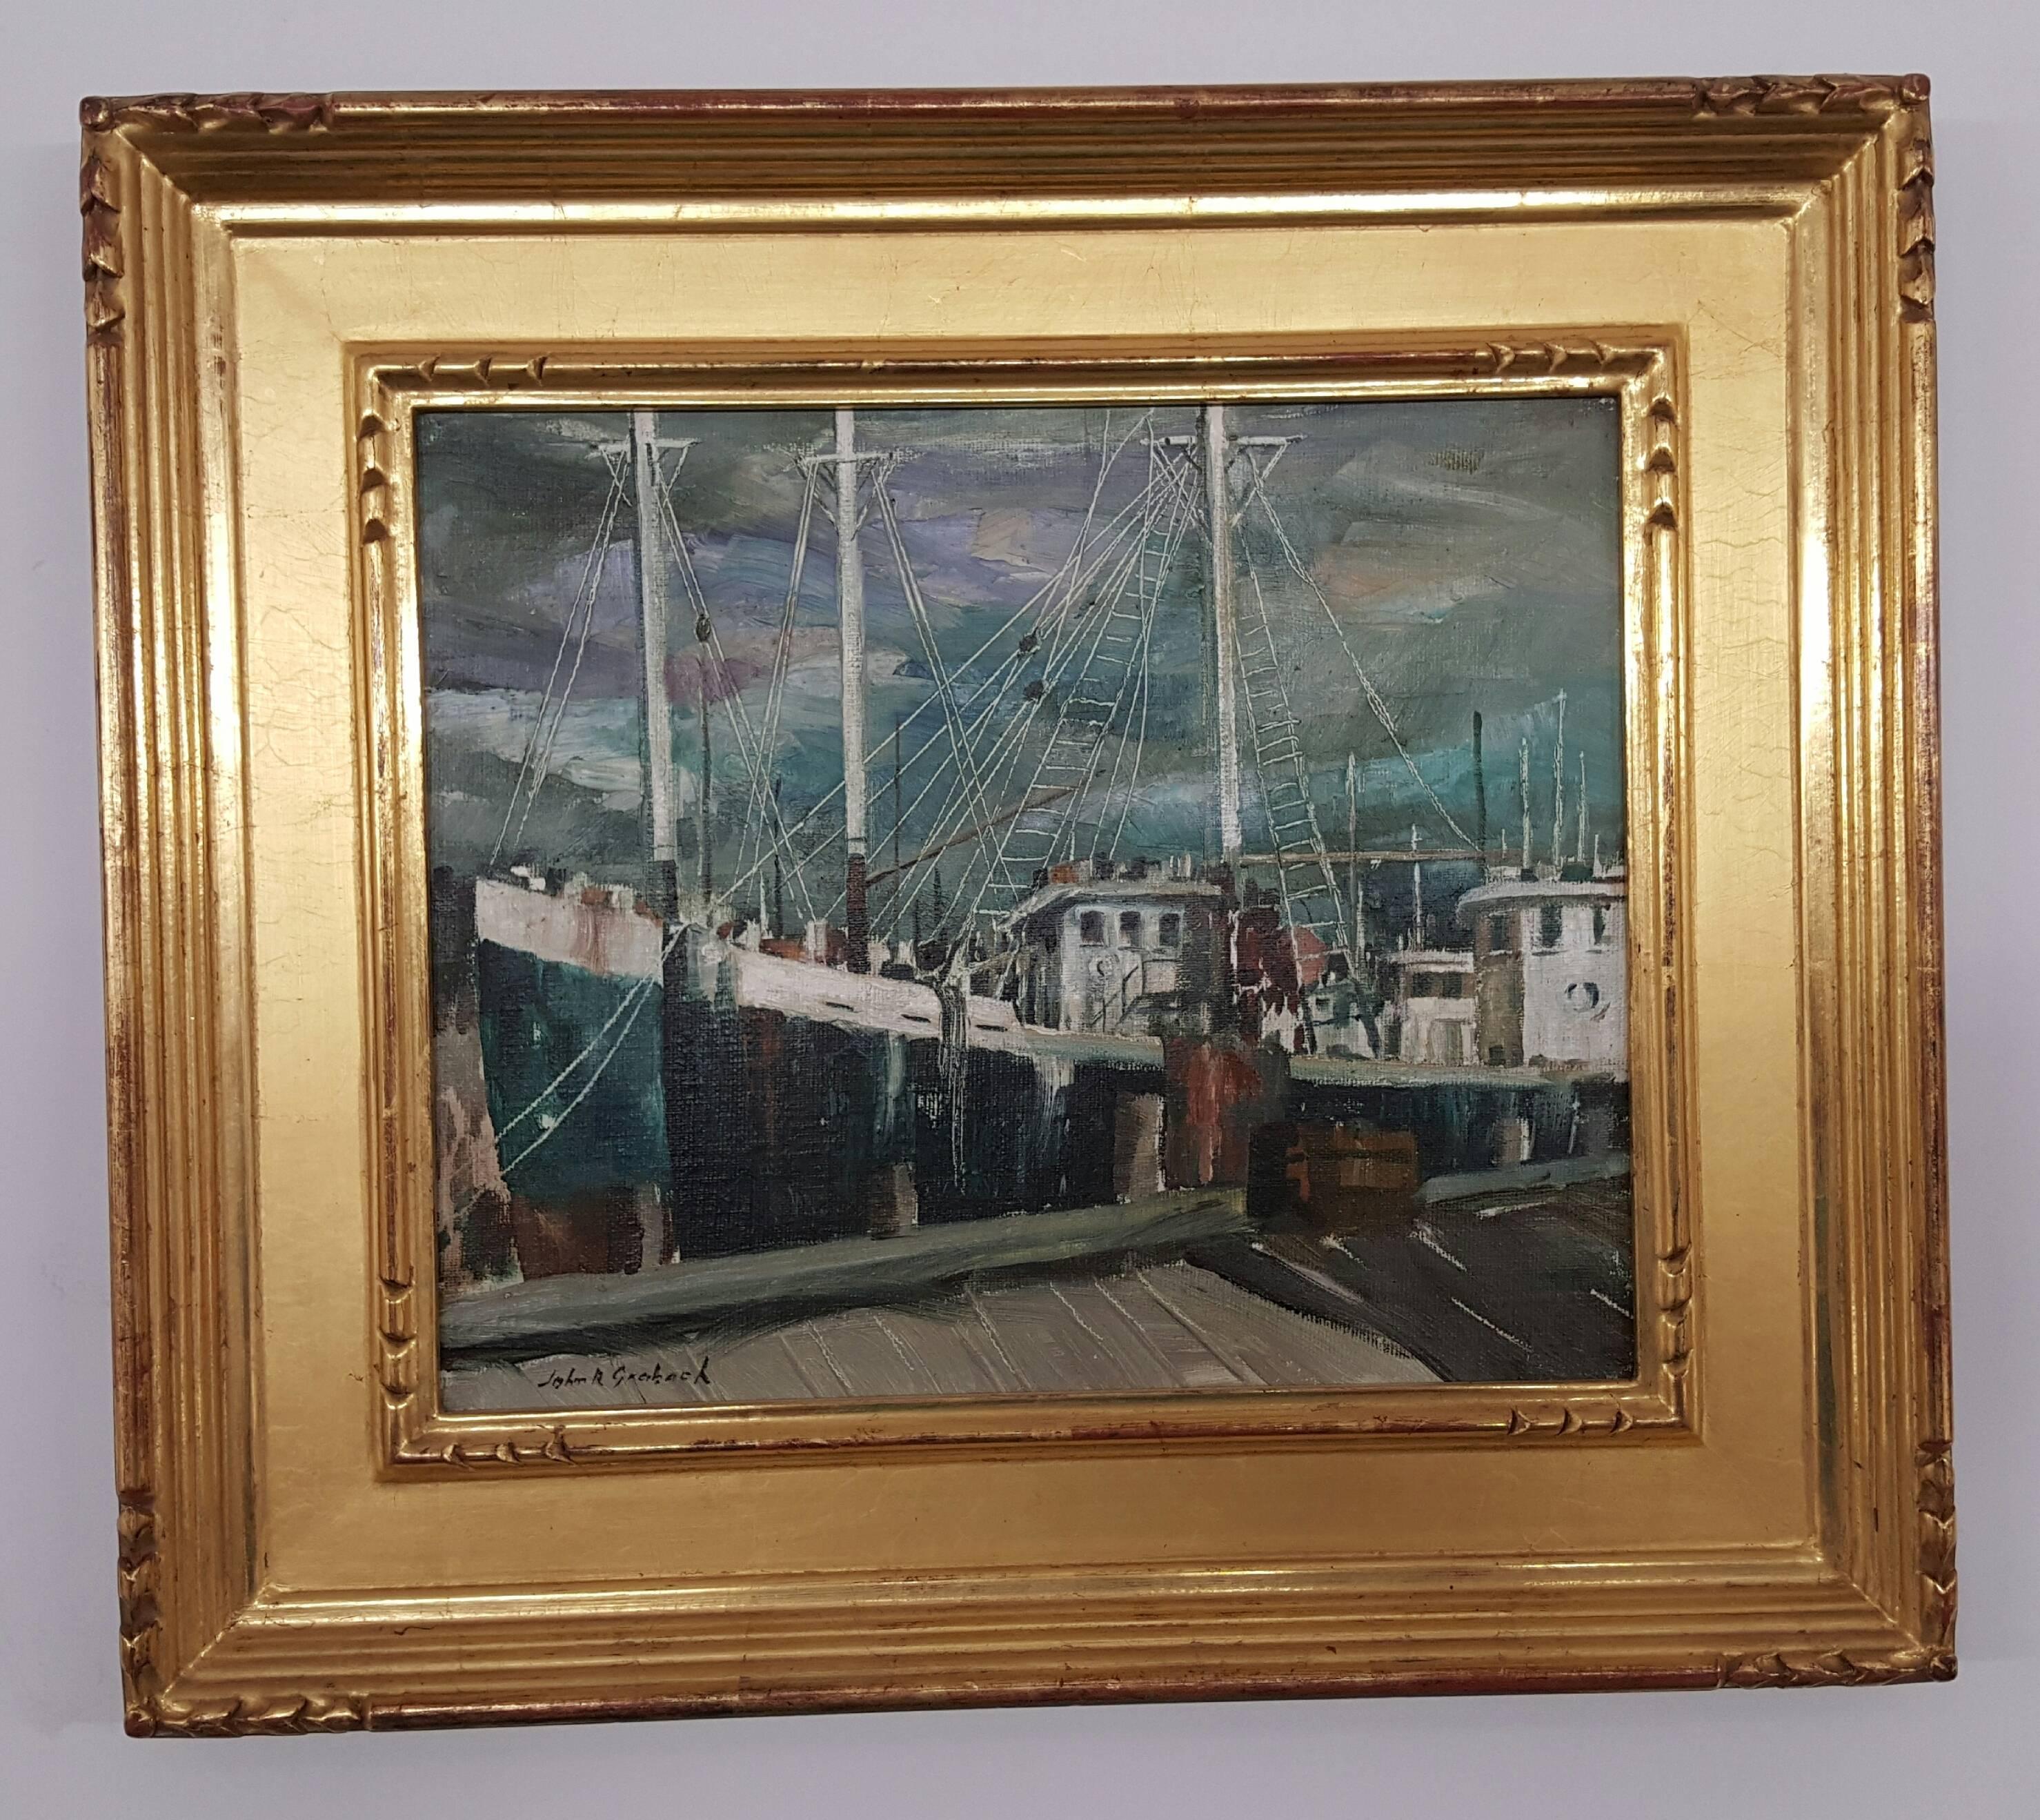 Gloucester Fishing Boat - Painting by John R. Grabach